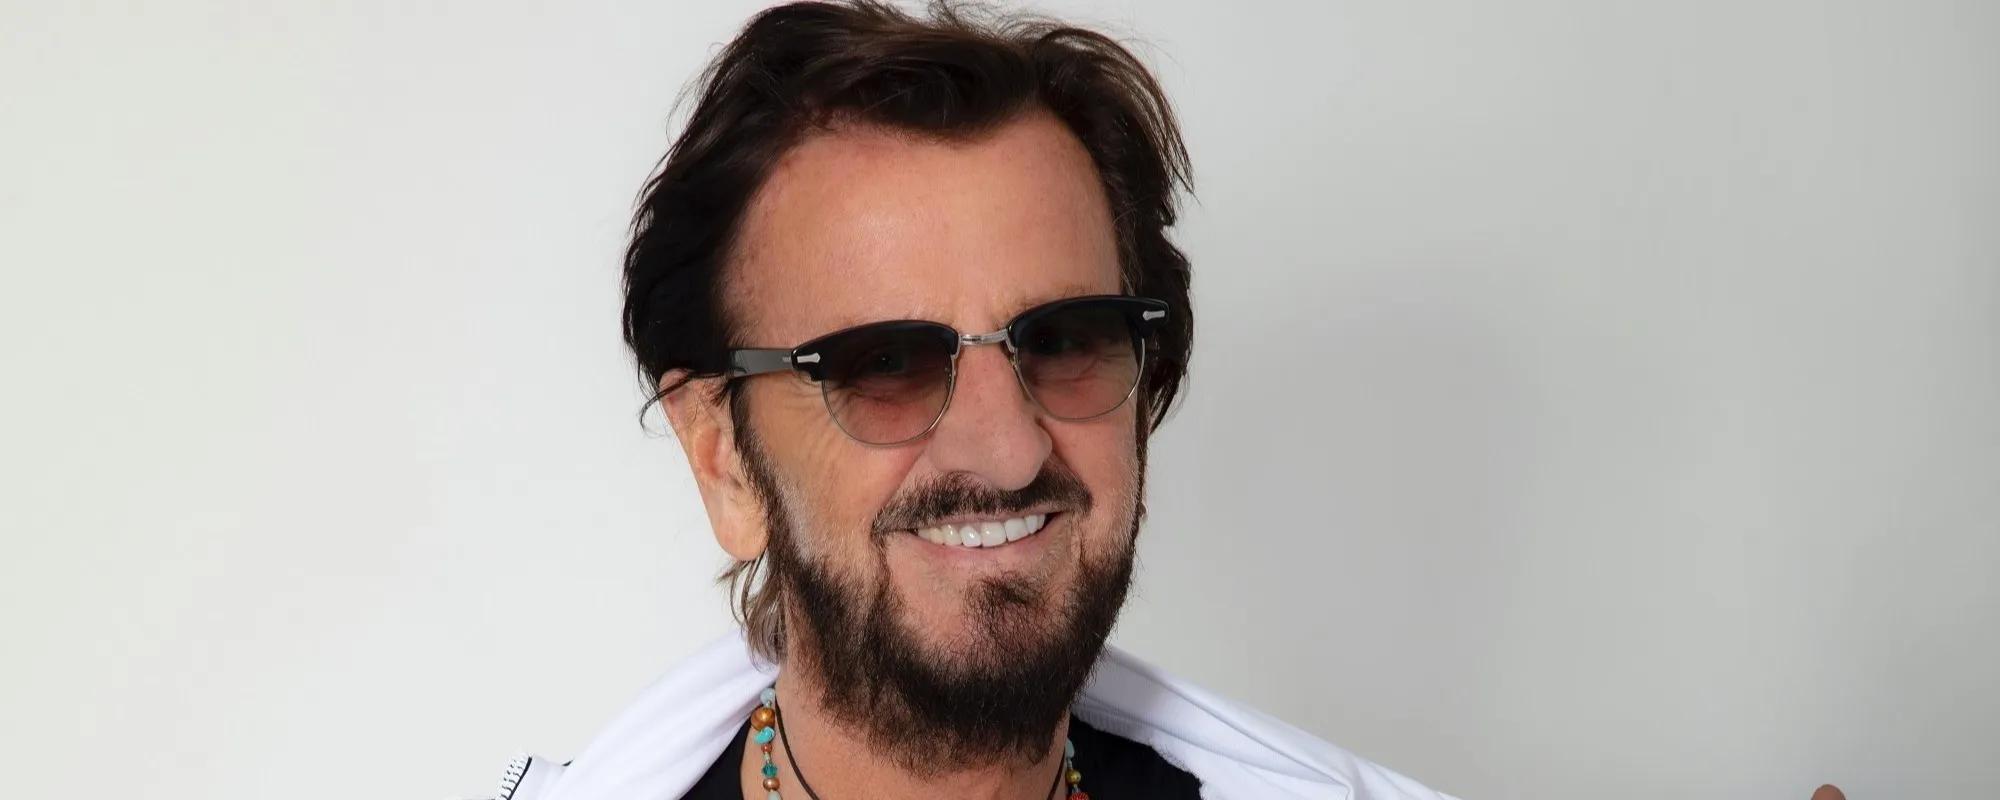 Ringo Starr Shares Some New Details About His Upcoming Album [Video]